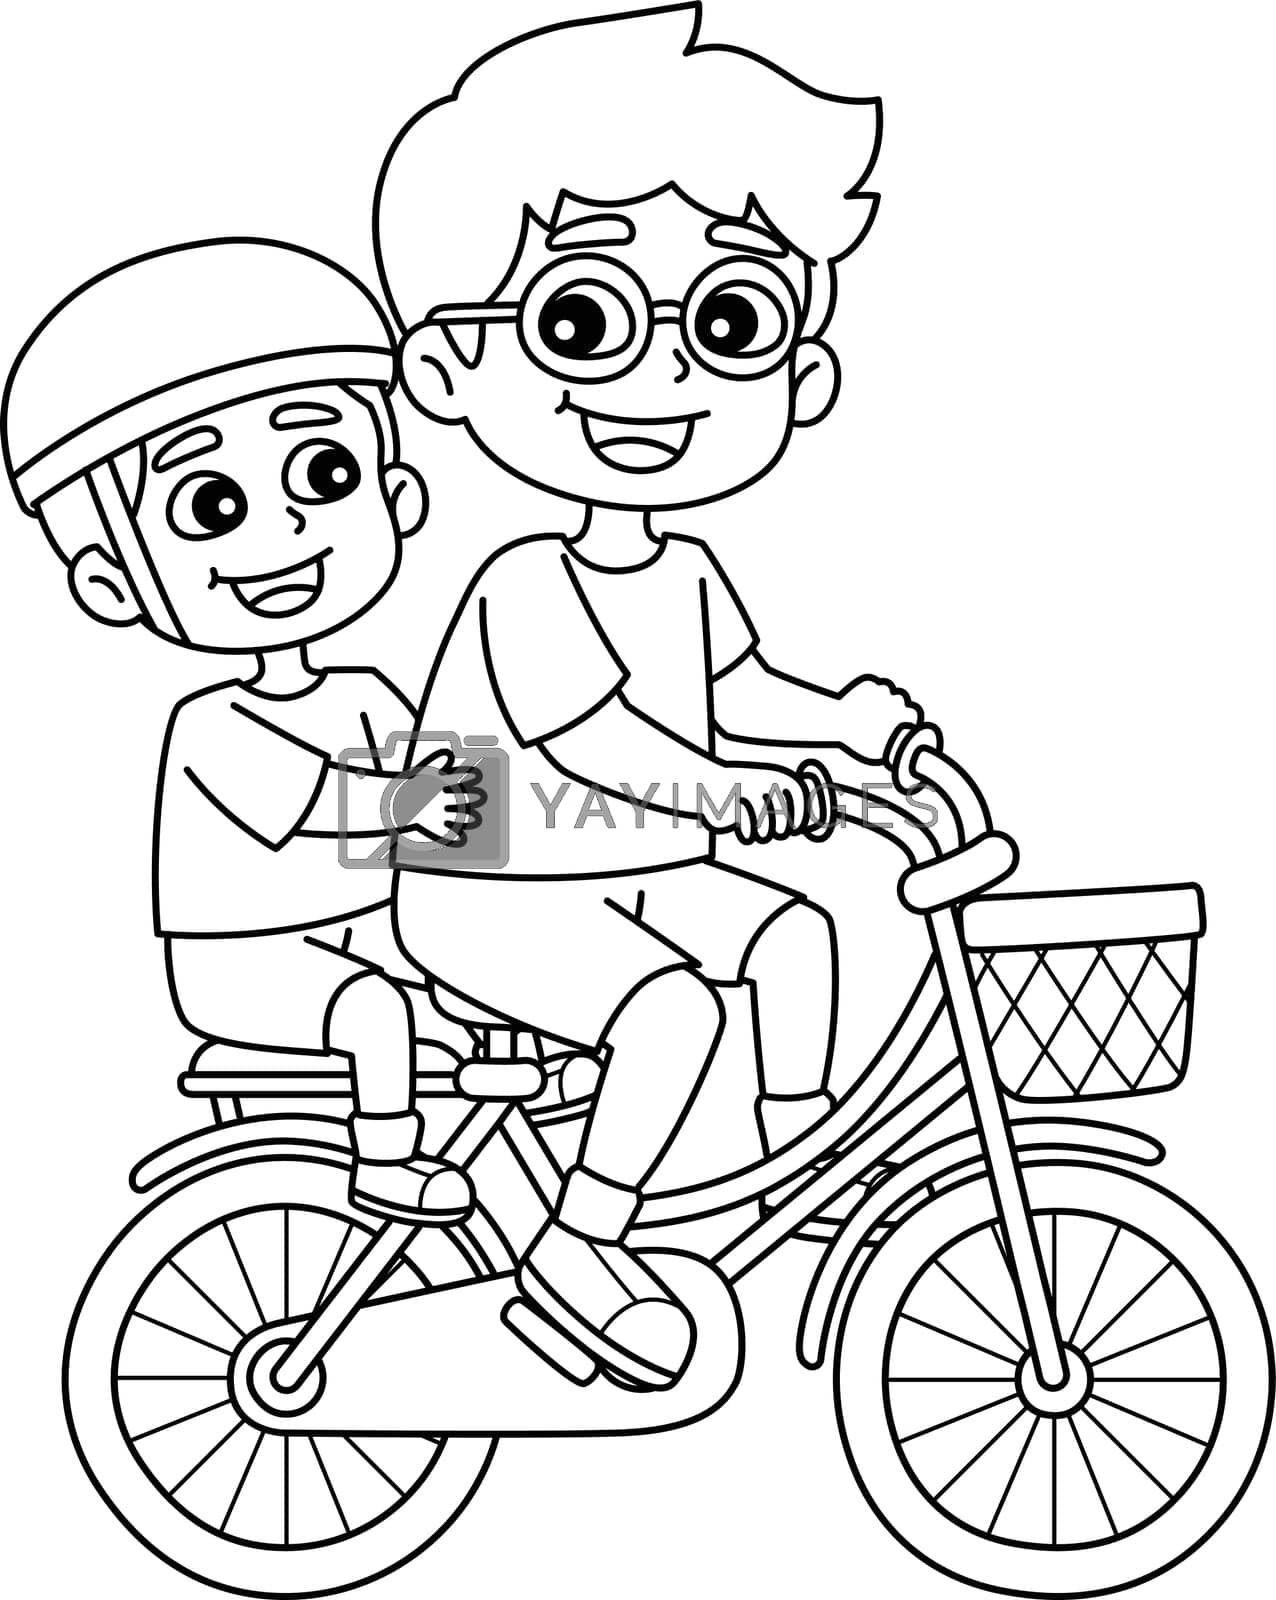 Royalty free image of Father and Son Riding a Bike Isolated Coloring by abbydesign